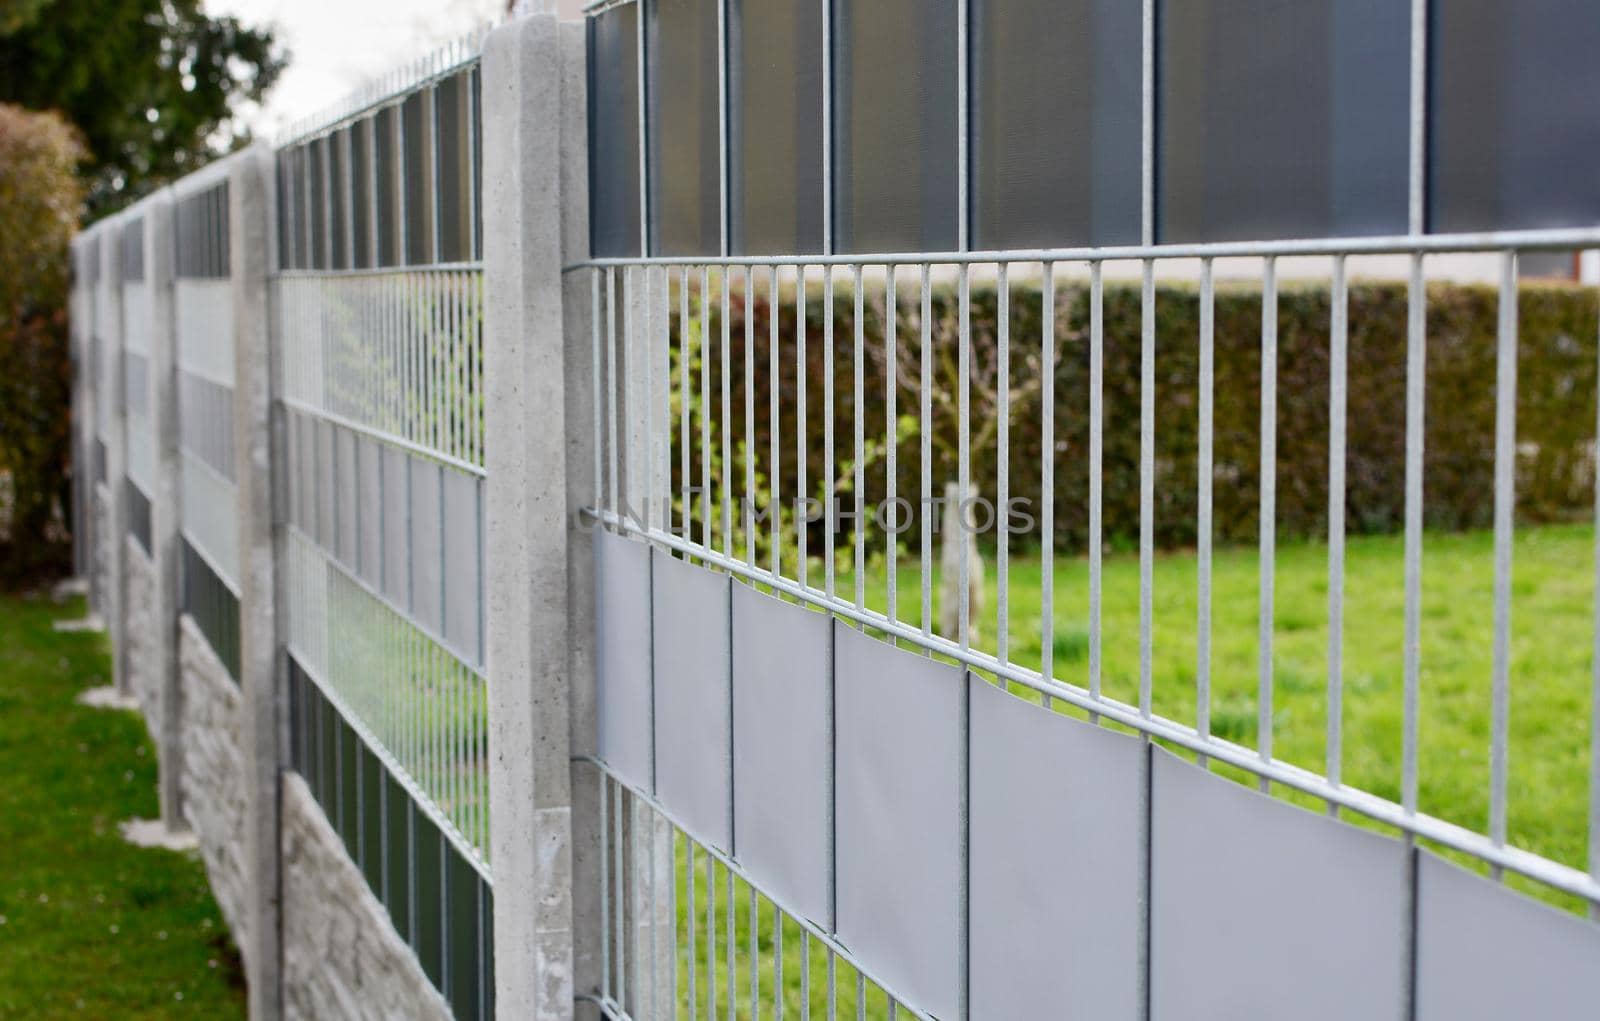 Garden fence made with decorative galvanized wire fence panels inserted in to the concrete columns.